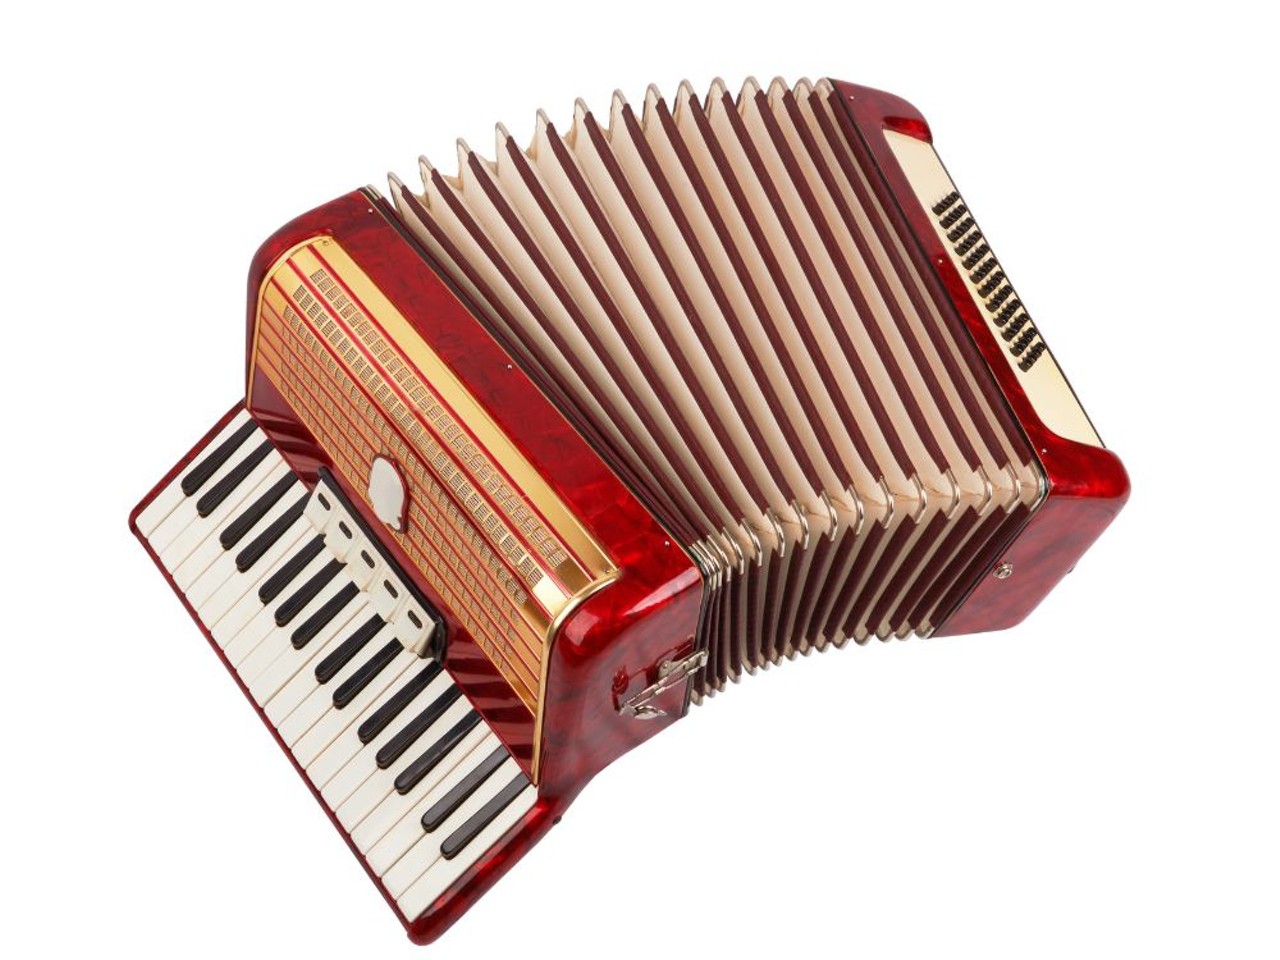 Accordions are annoying AF.